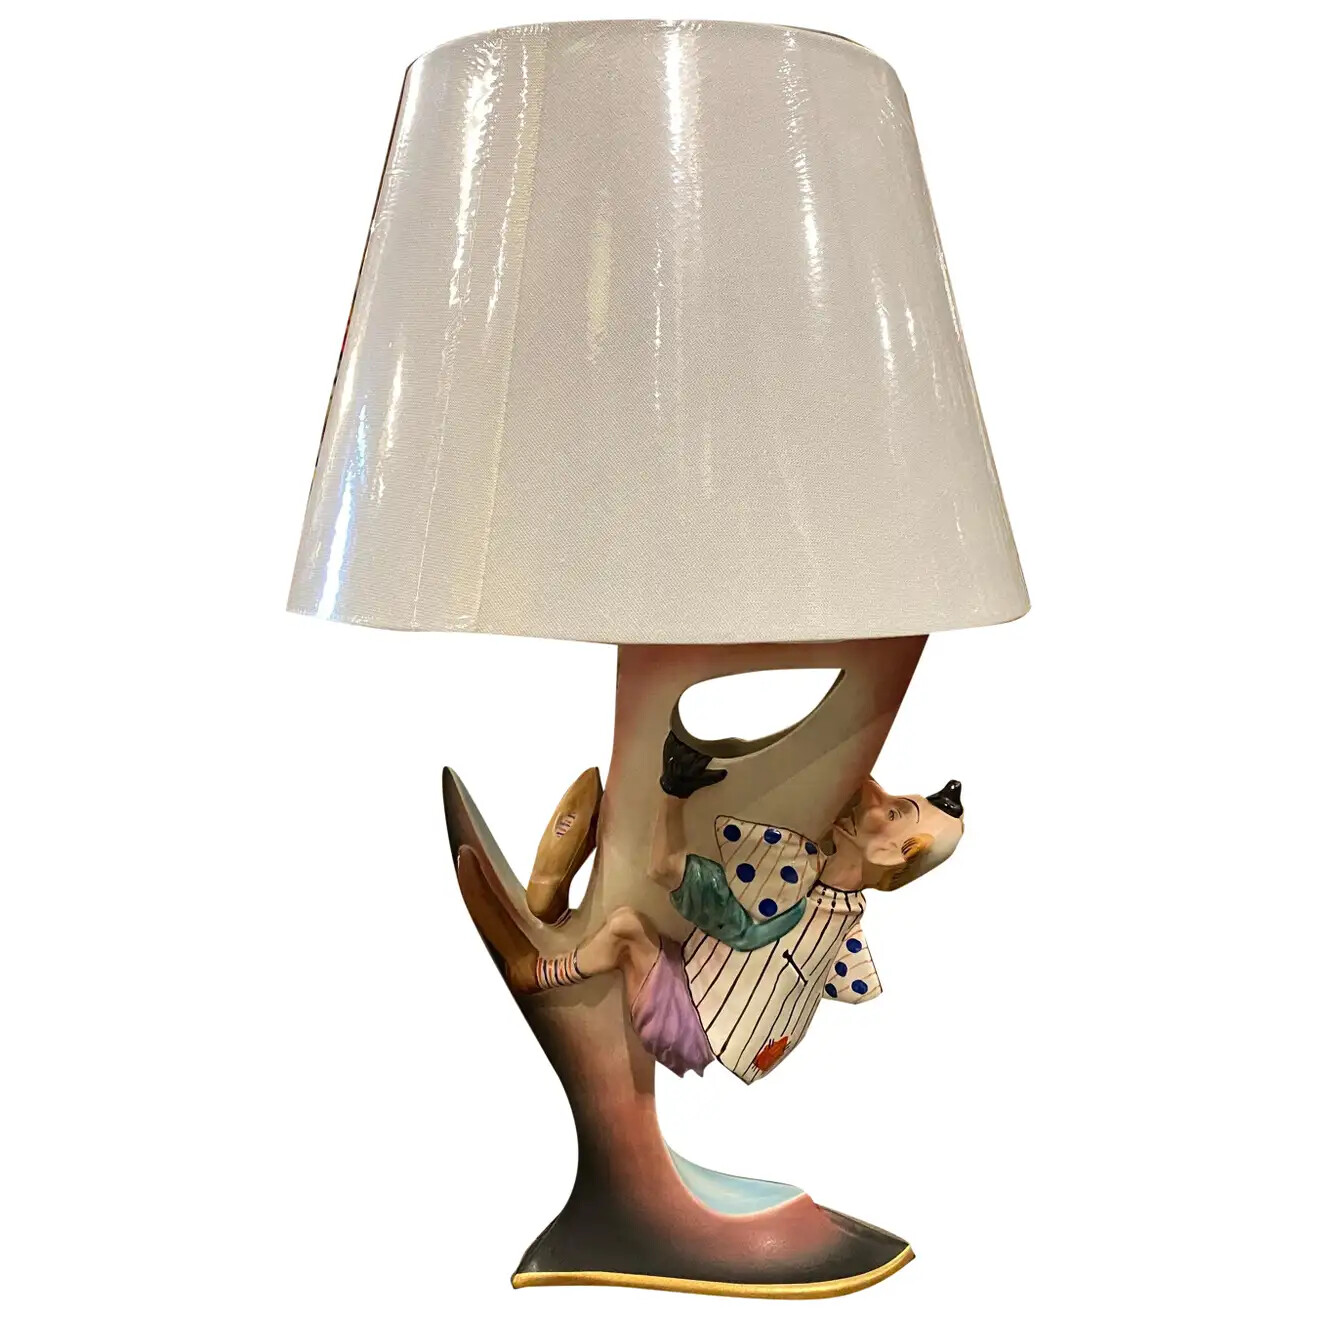 1960s Hand-Painted Porcelain Italian Table Lamp